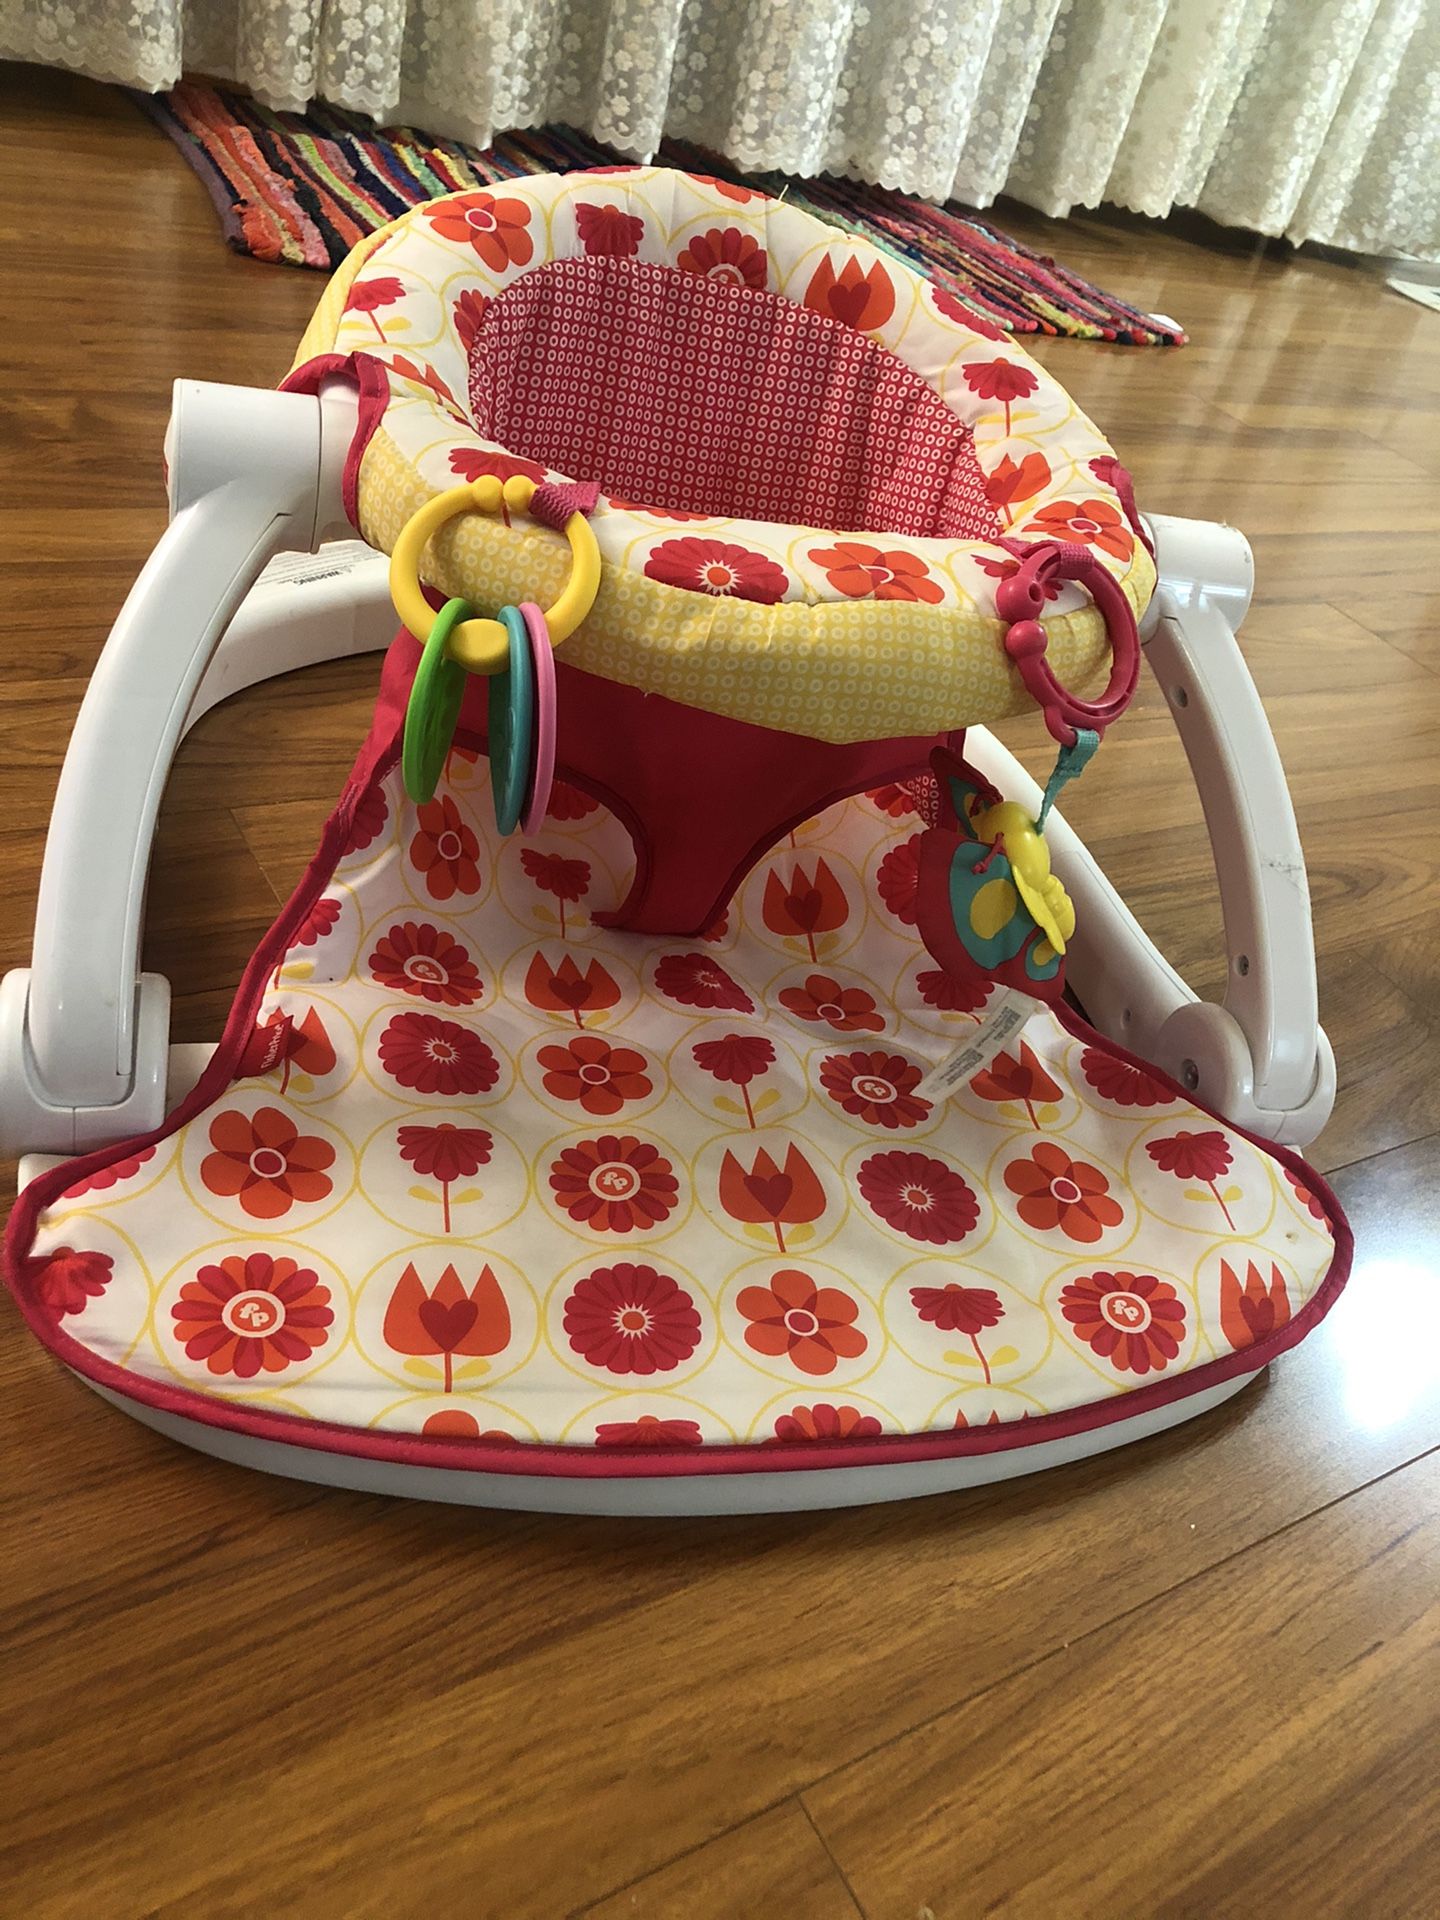 Chair for baby